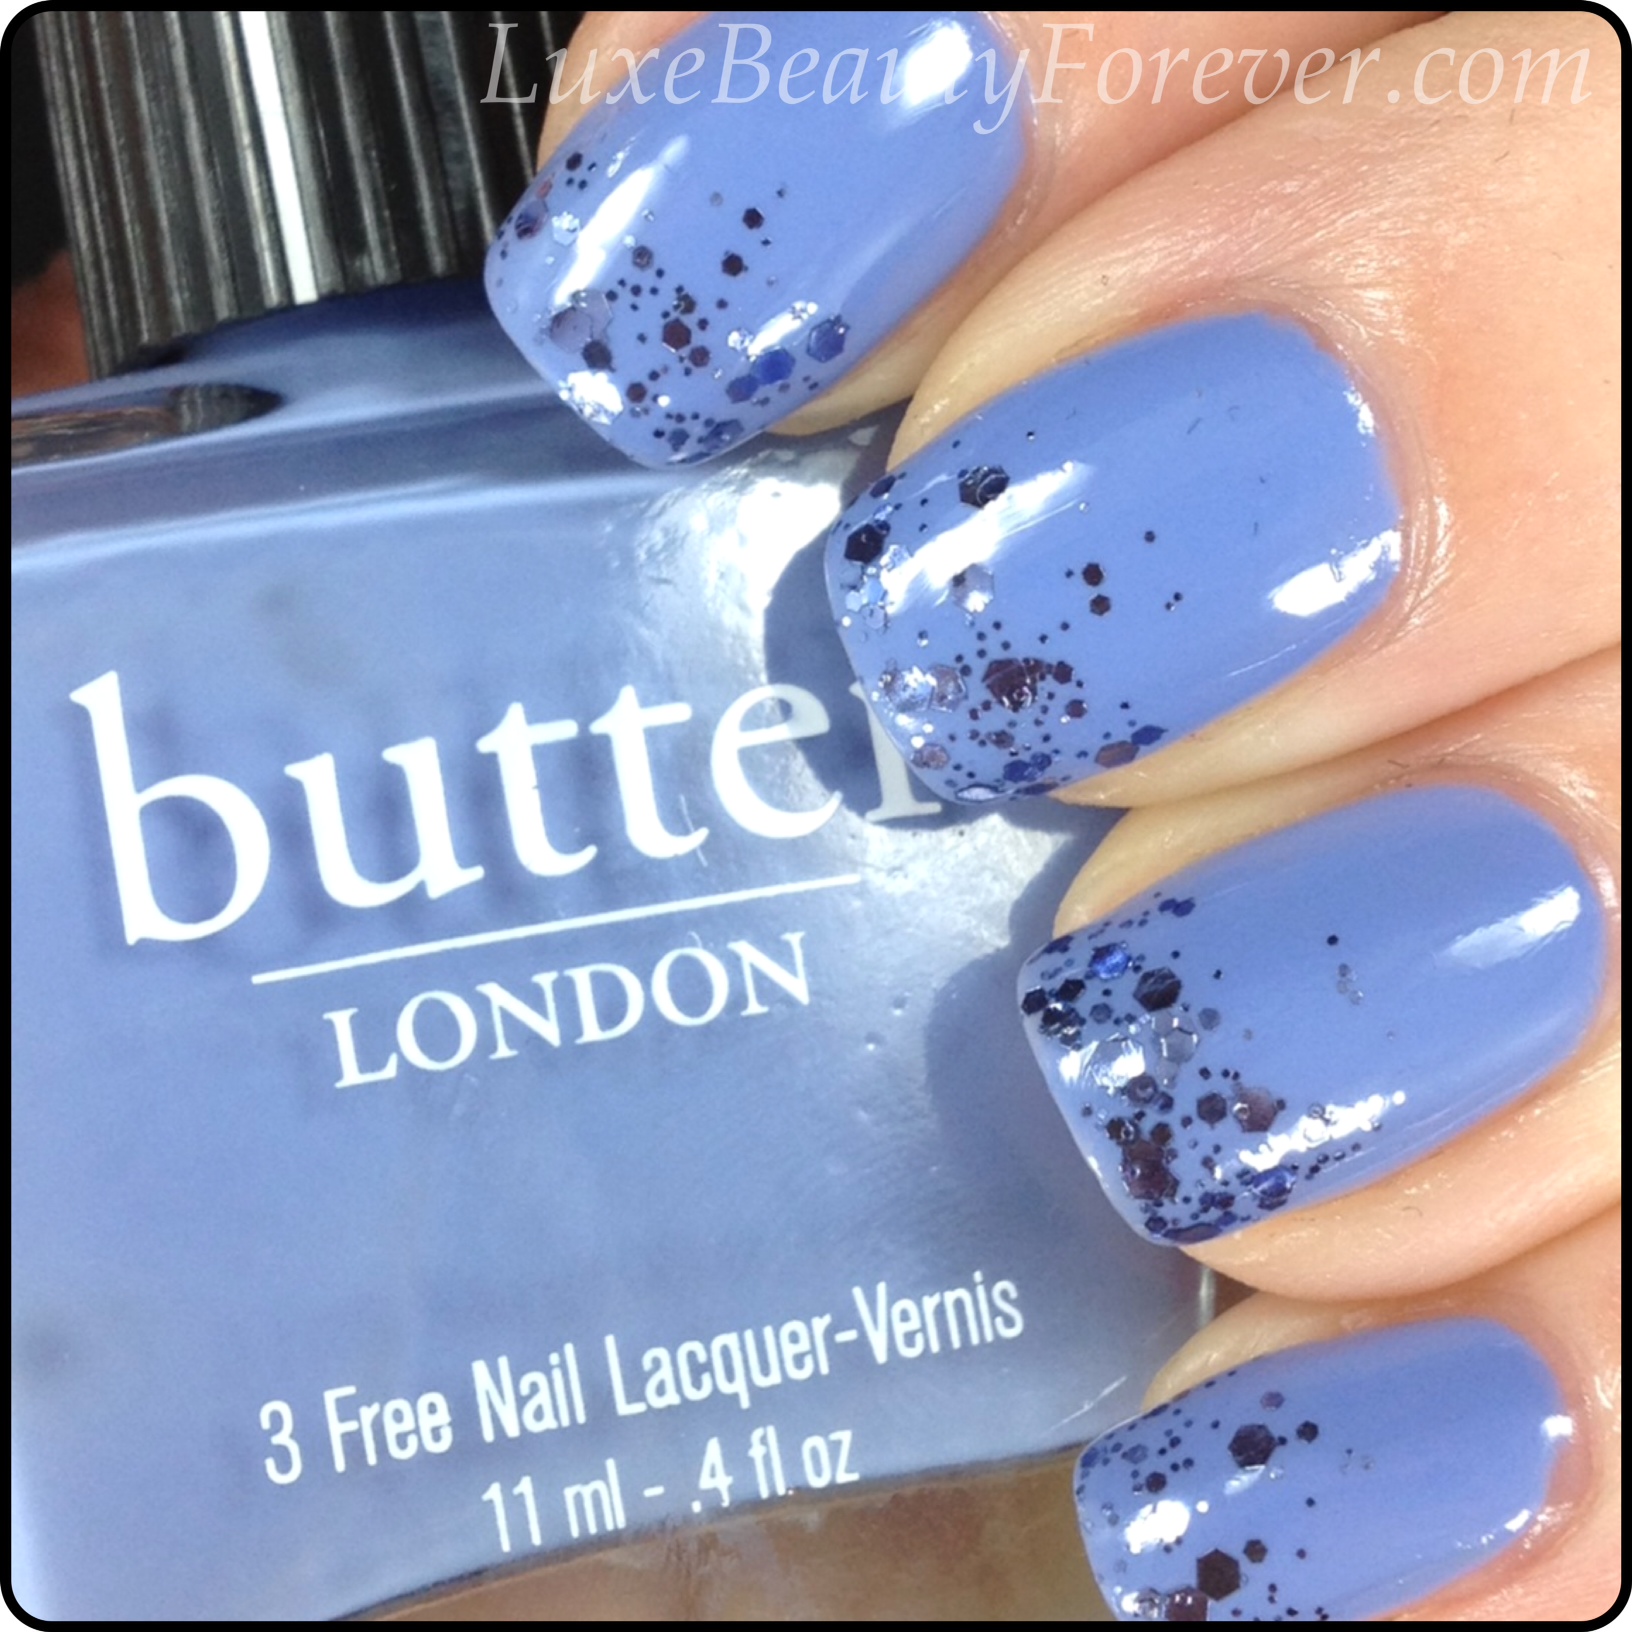 Lovely Periwinkle Nails with Glitter Tips.